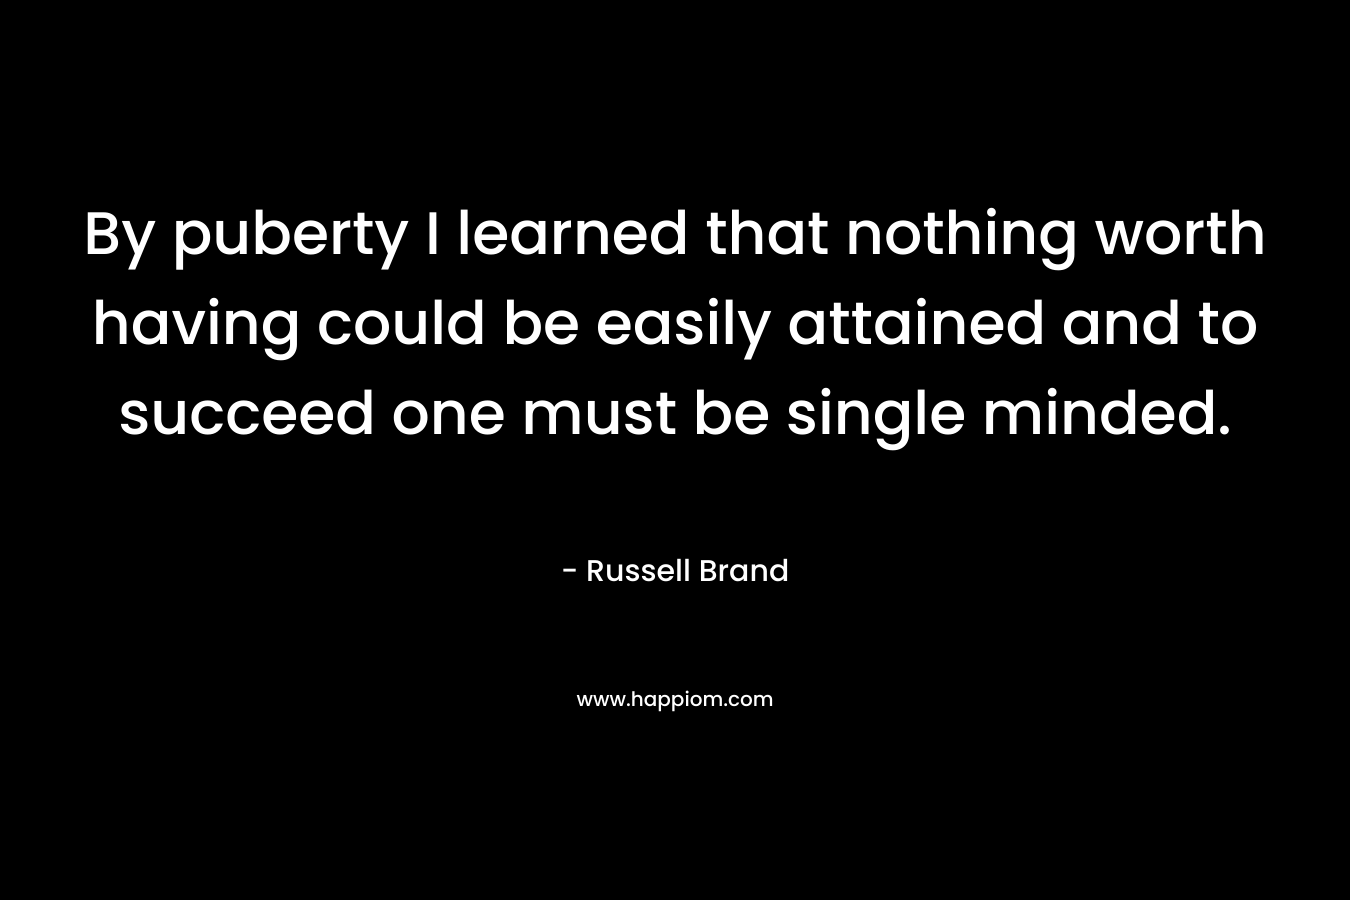 By puberty I learned that nothing worth having could be easily attained and to succeed one must be single minded. – Russell Brand